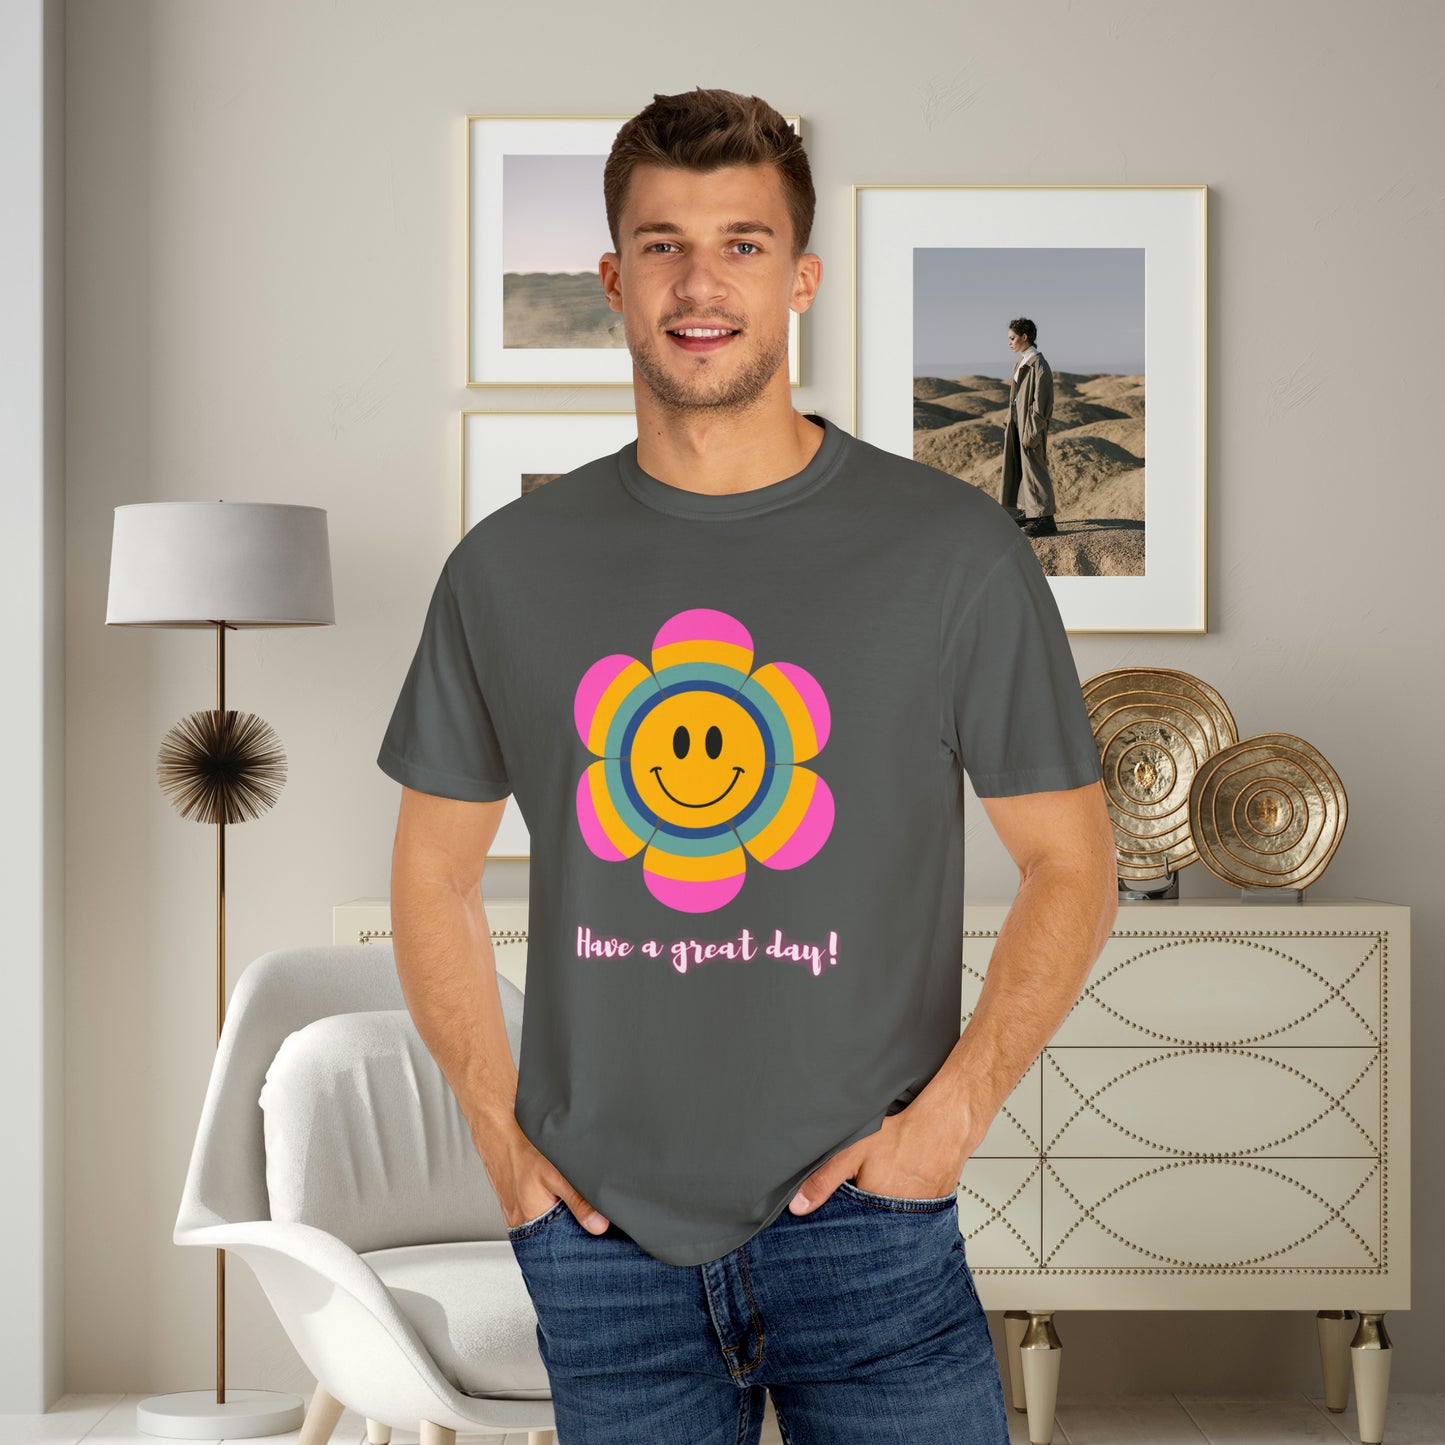 Smiling flower with "Have a great day” below it on this black only Unisex Garment-Dyed T-shirt. Spread some good cheer!